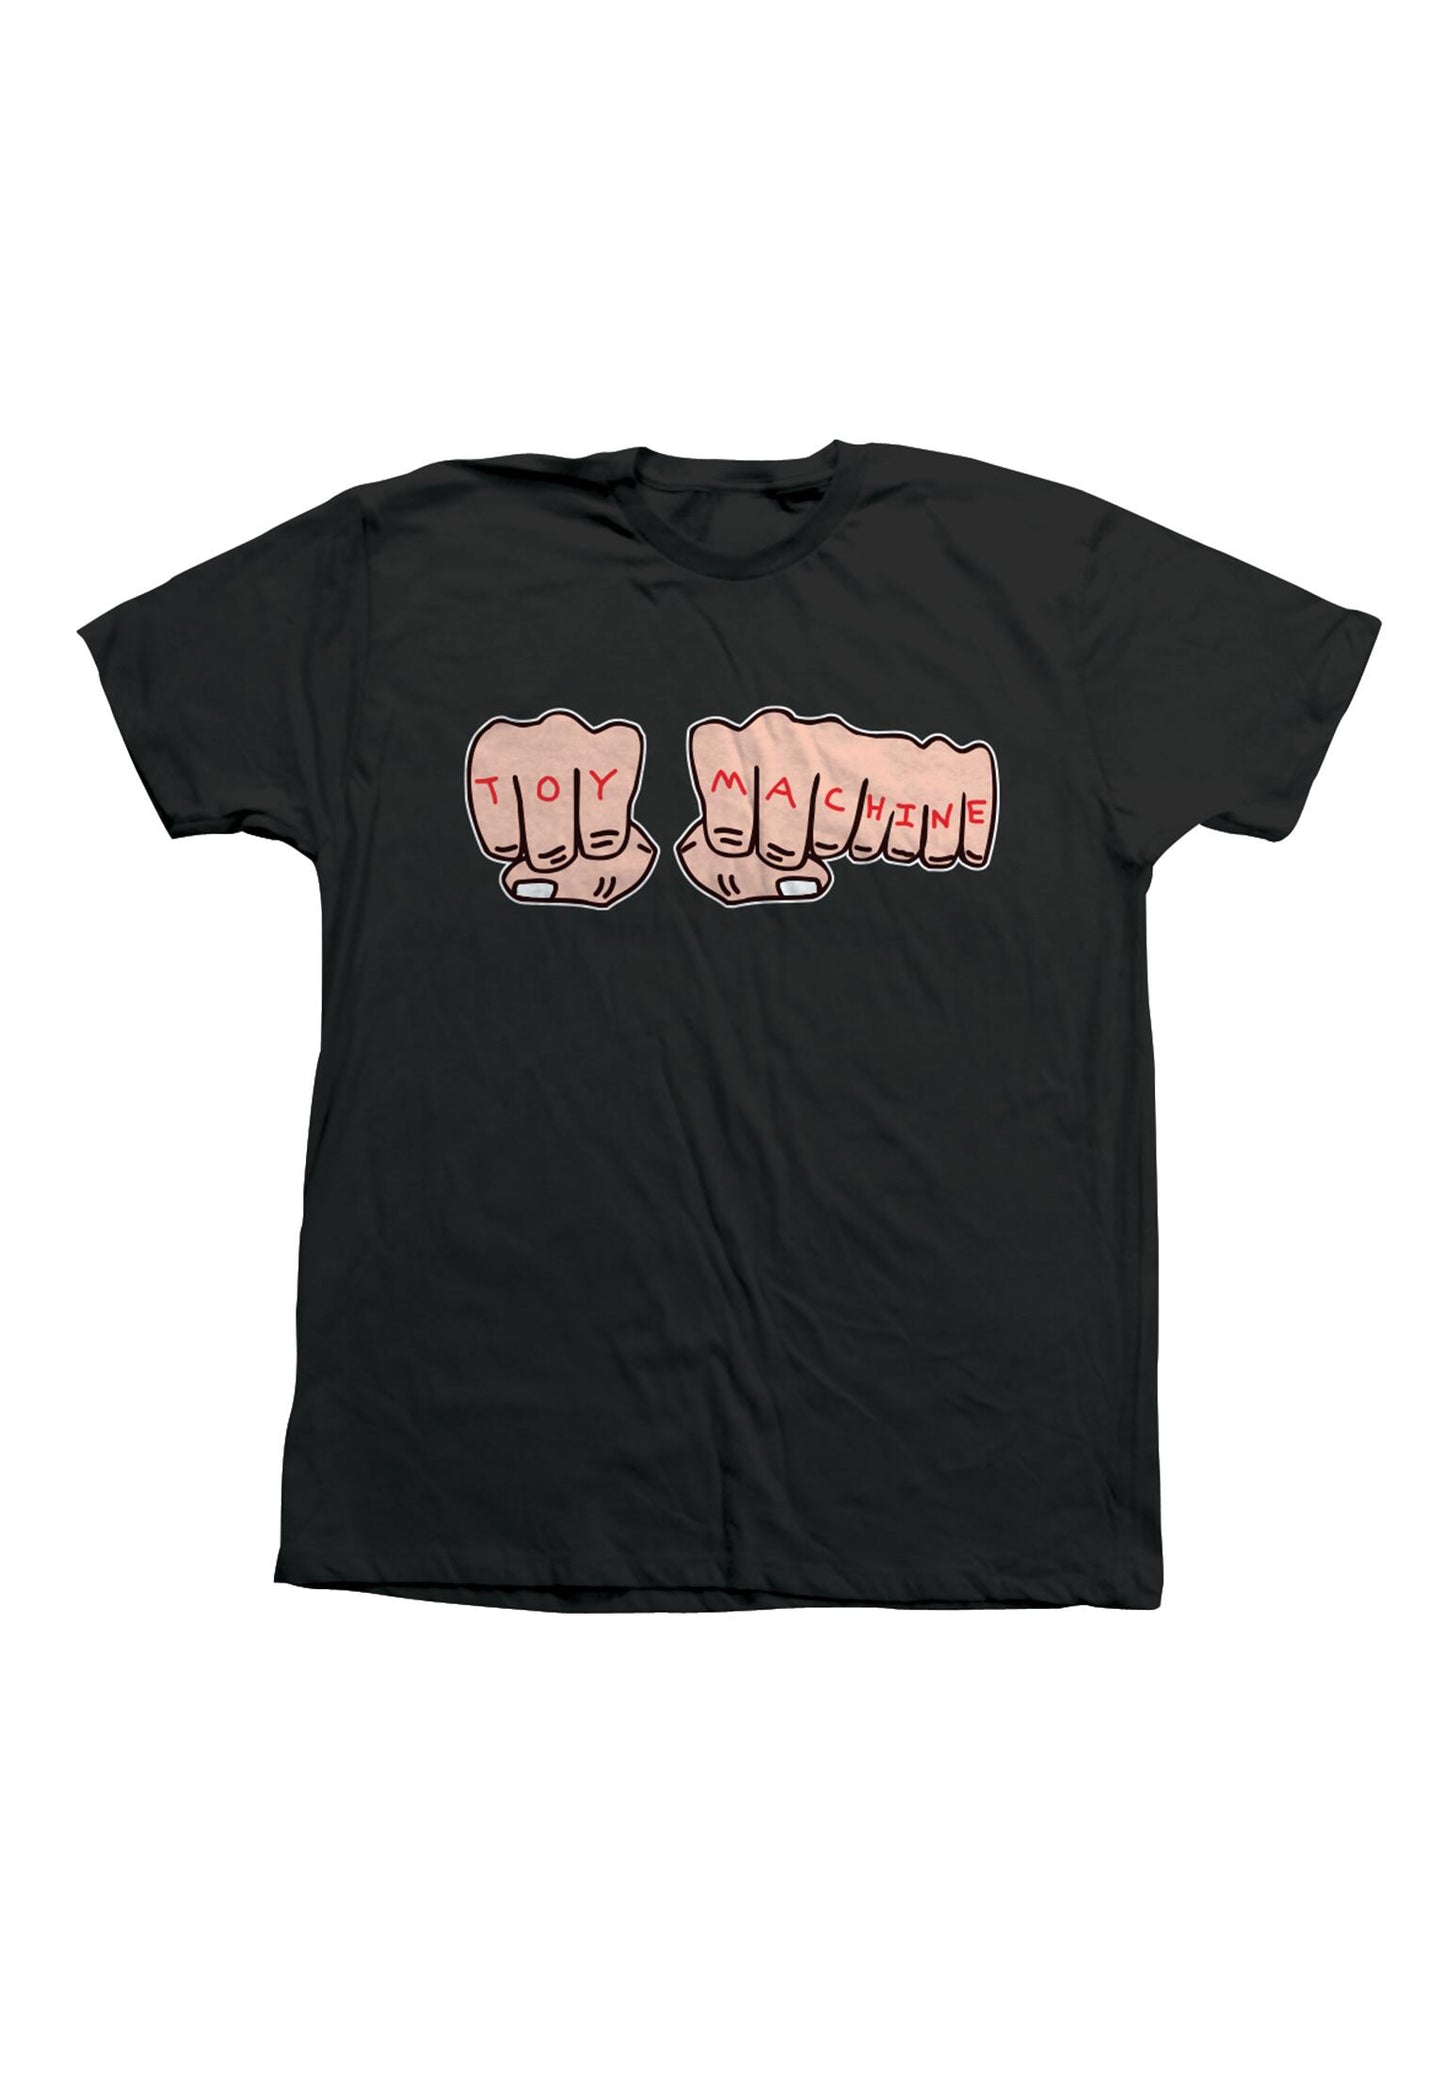 TOY MACHINE - FISTS YOUTH TEE - BLACK